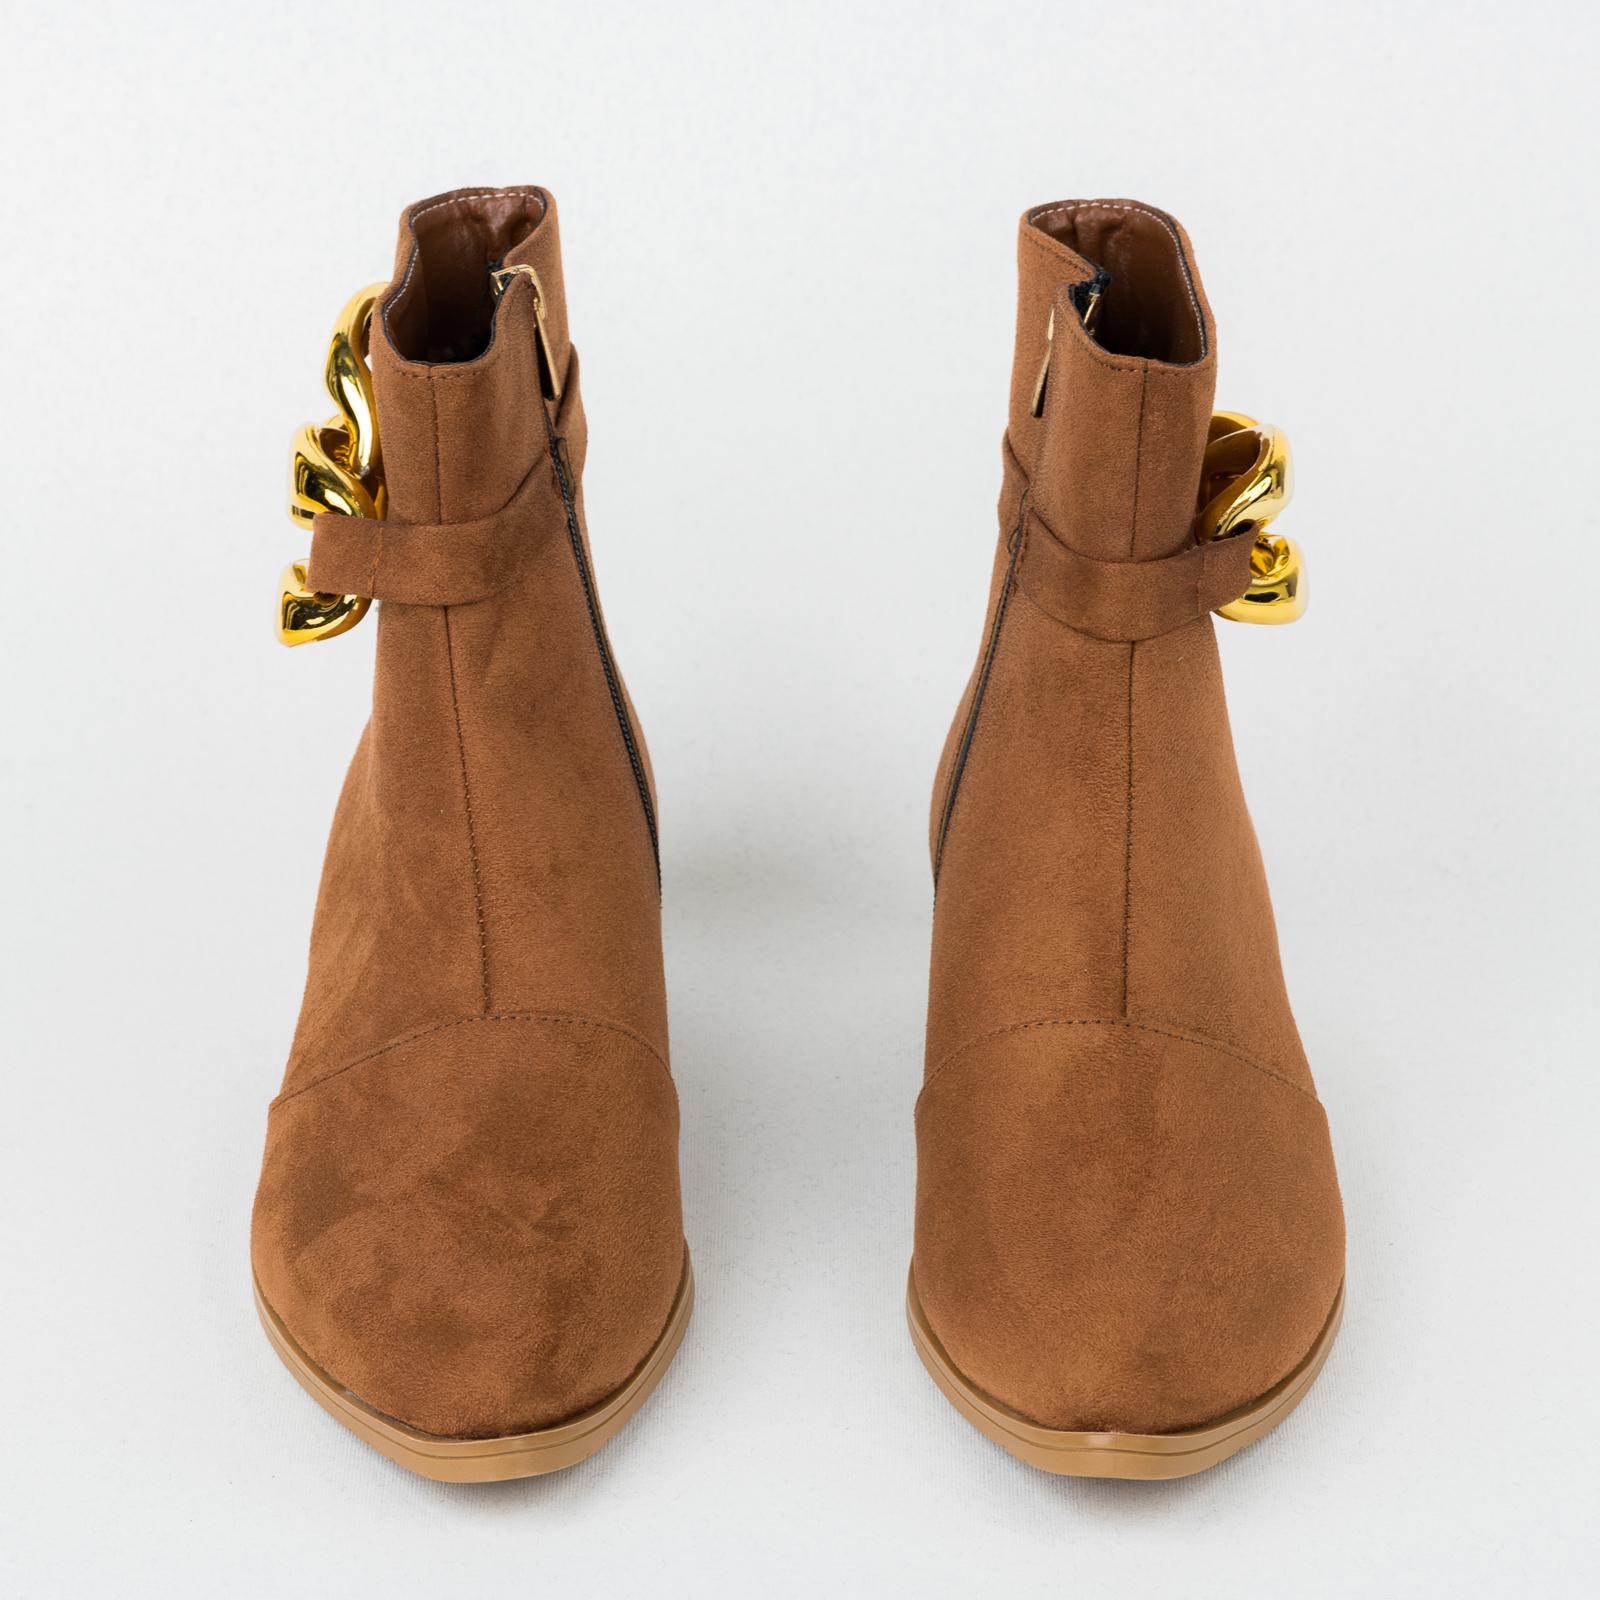 Women ankle boots B357 - CAMEL